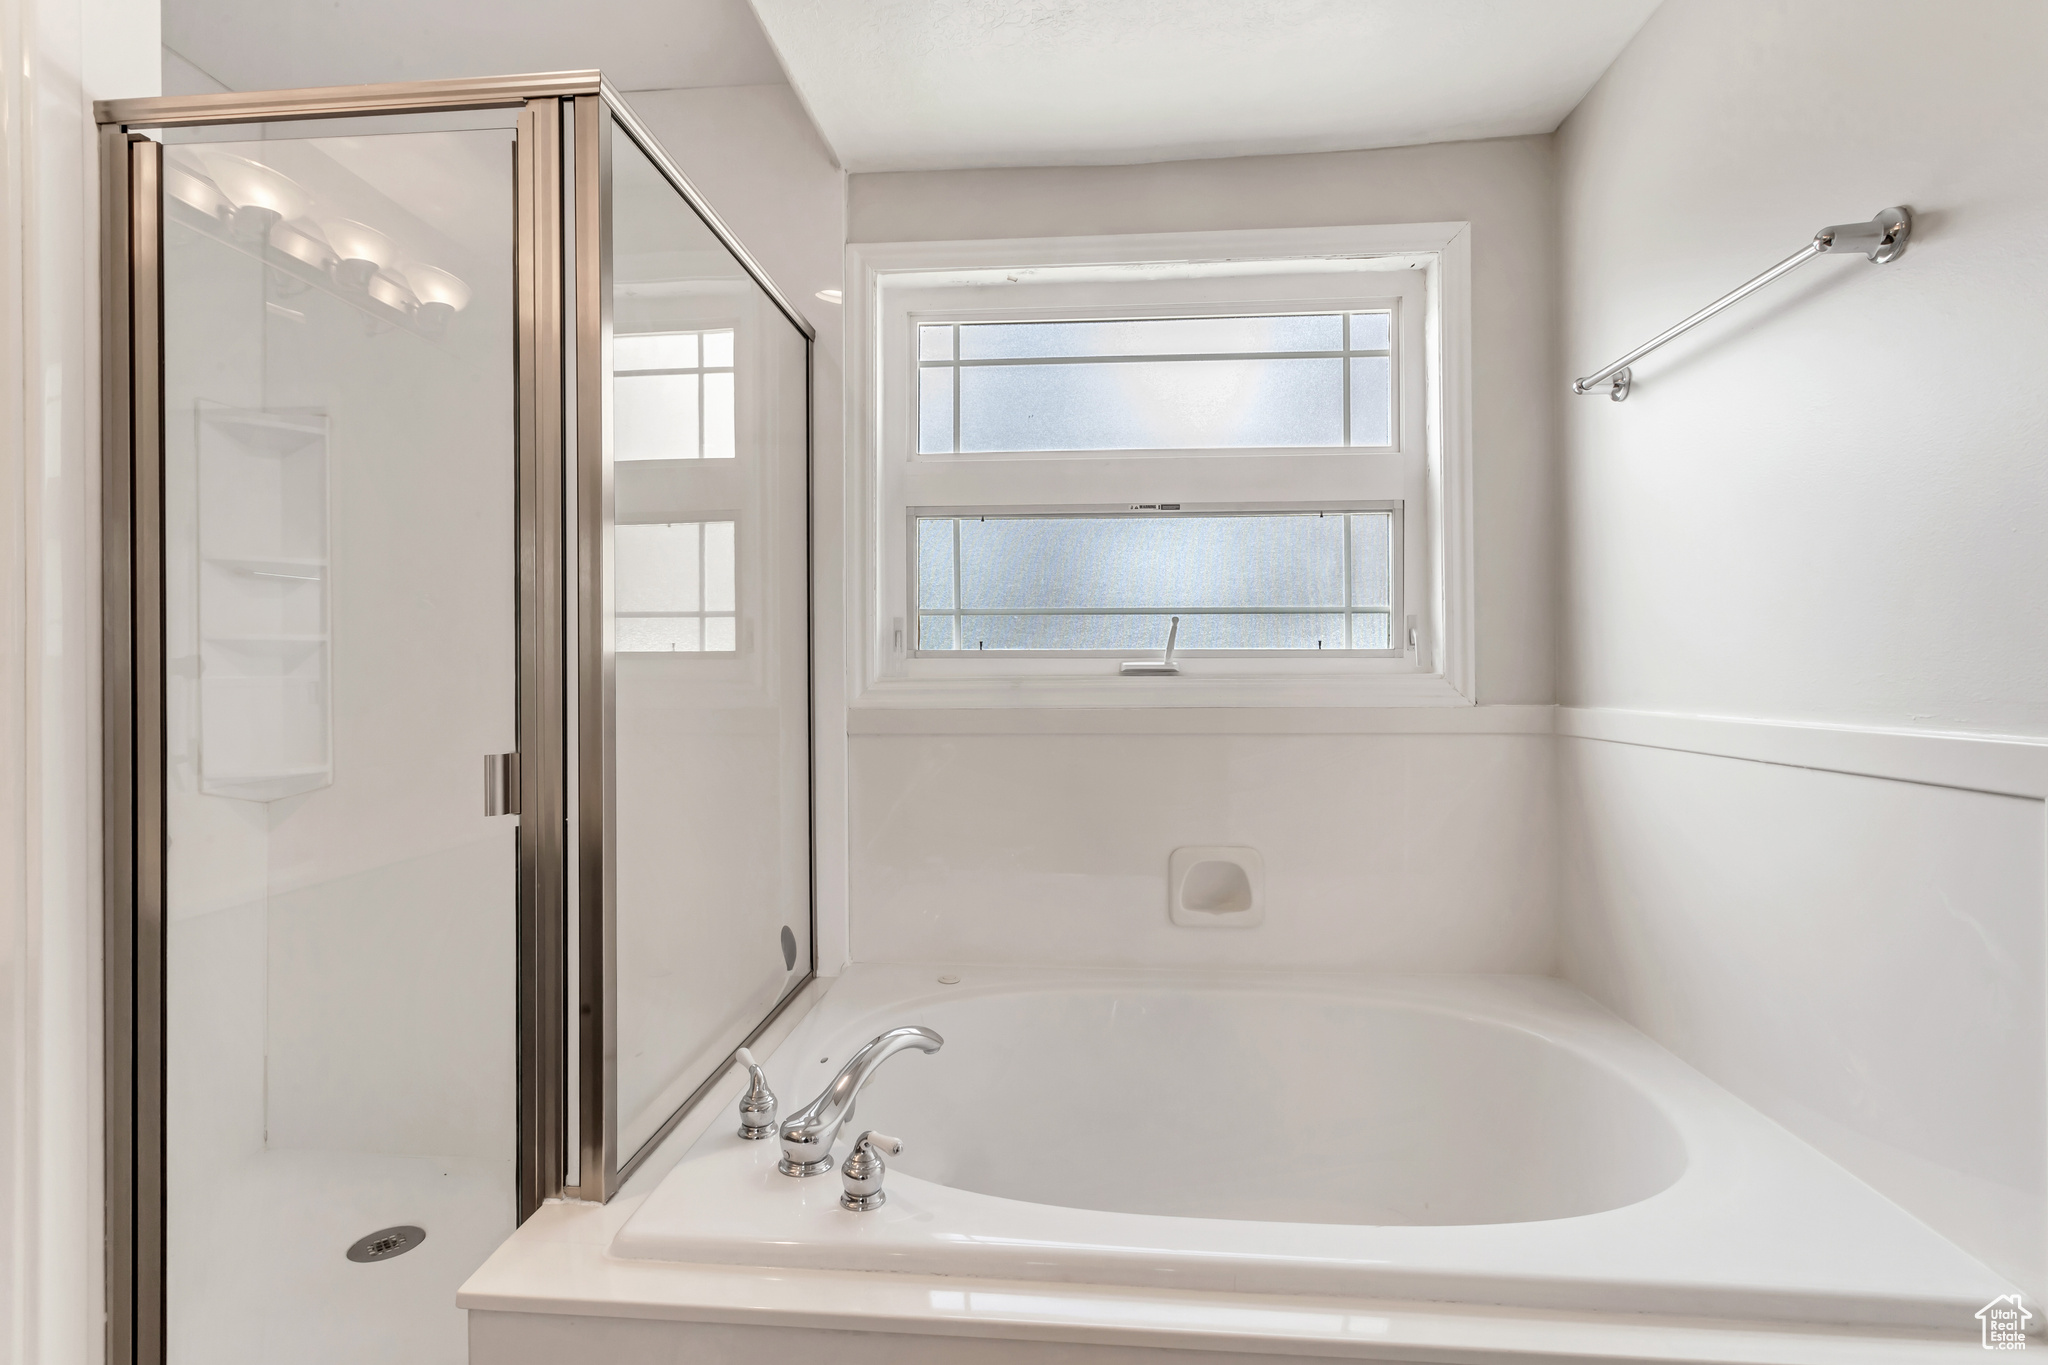 Large soaking tub and separate shower in bathroom for primary suite in main level